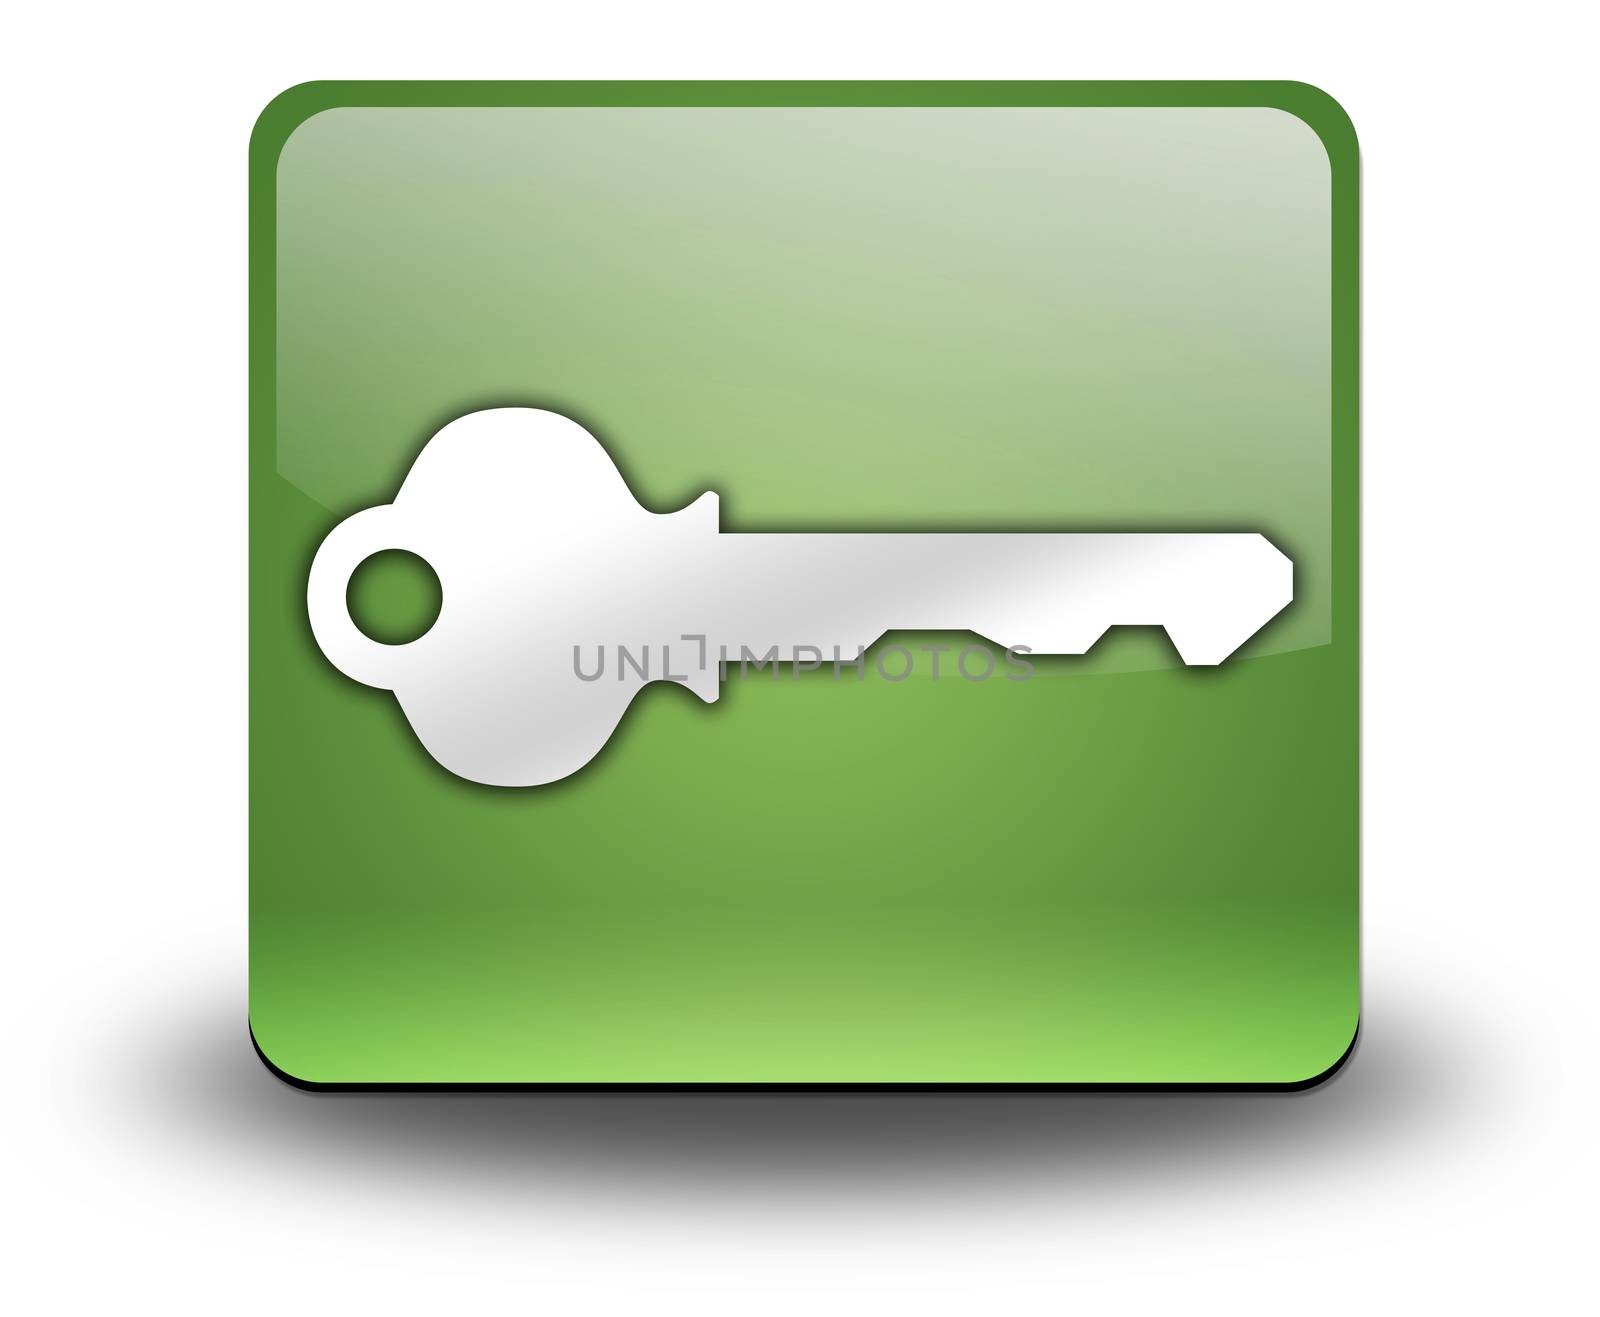 Icon, Button, Pictogram with Key symbol